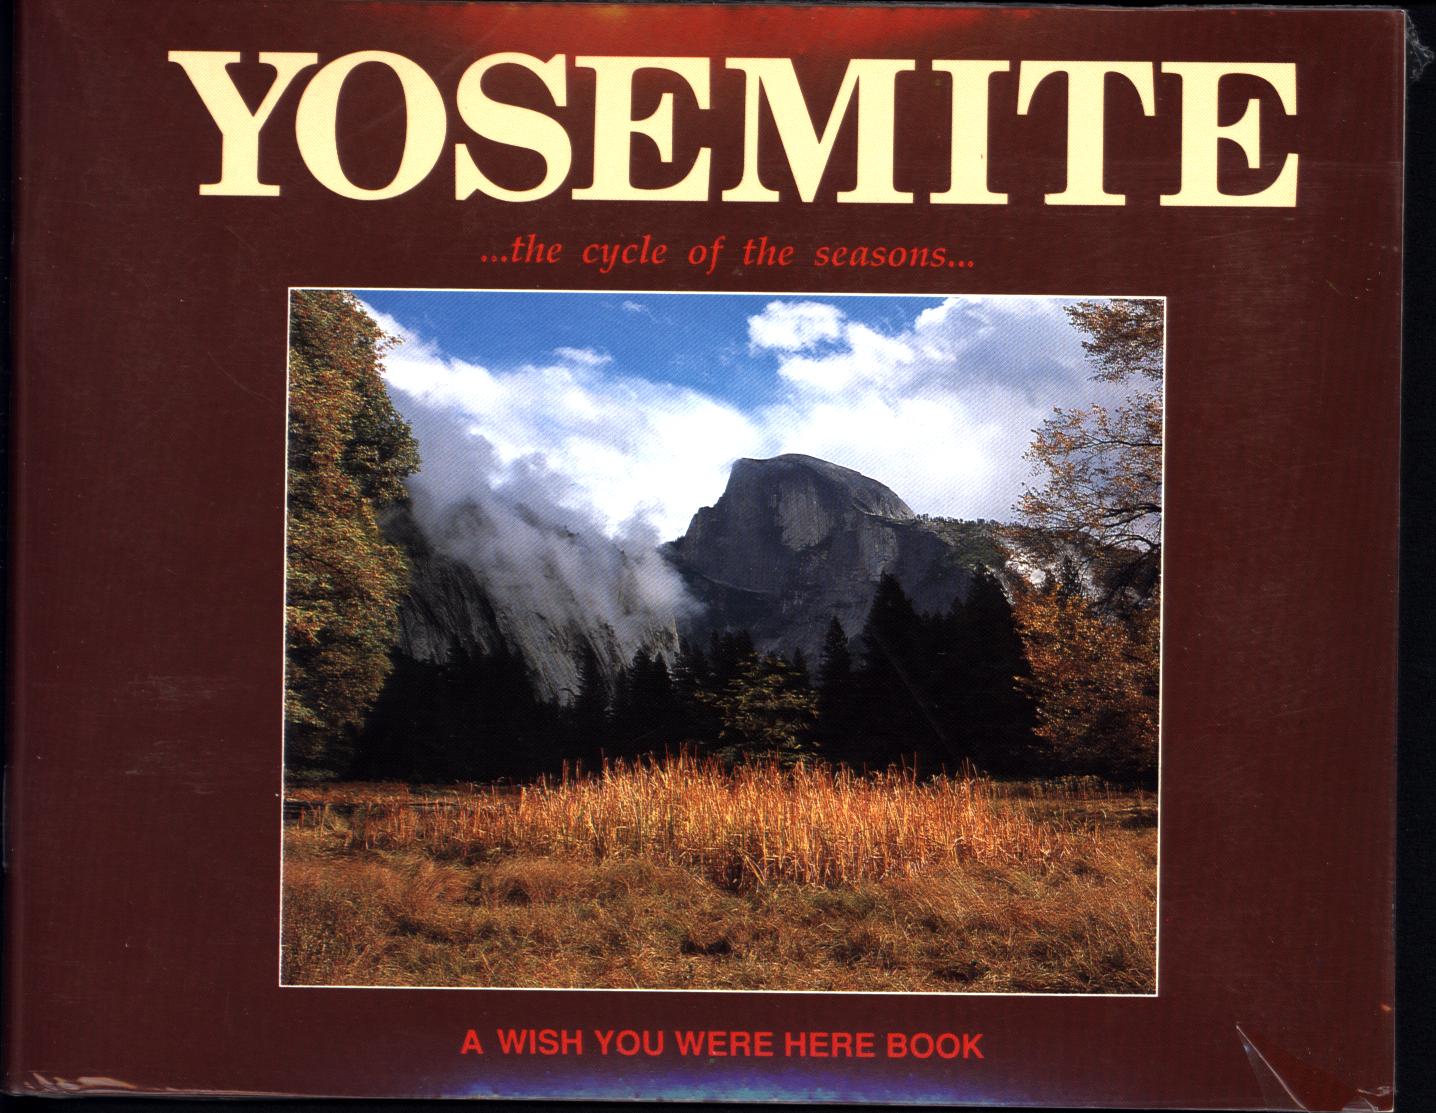 YOSEMITE...THE CYCLE OF TUE SEASONS: A Wish You Were Here Book.